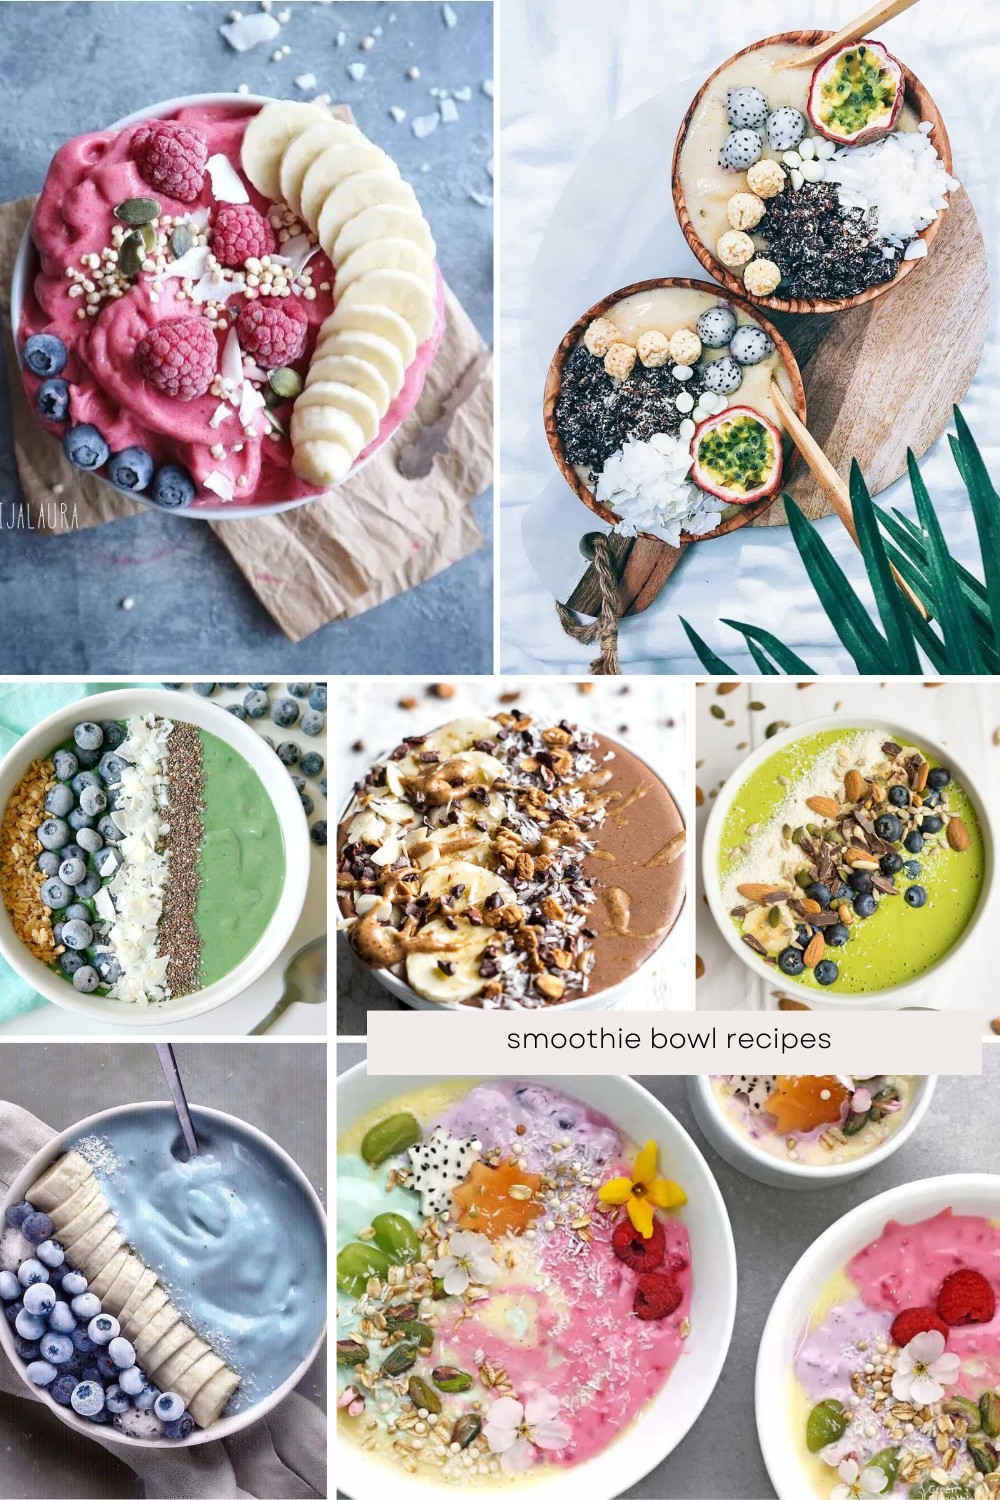 Transform your mornings with these amazing smoothie bowls! 🌞 These BEAUTY bowls are not just a treat for your taste buds, but also a feast for your eyes. Packed with nutrients and bursting with flavors, they’re the perfect way to start your day with a smile. 😊🌺 #SmoothieBowls #HealthyBreakfast #MorningDelight




